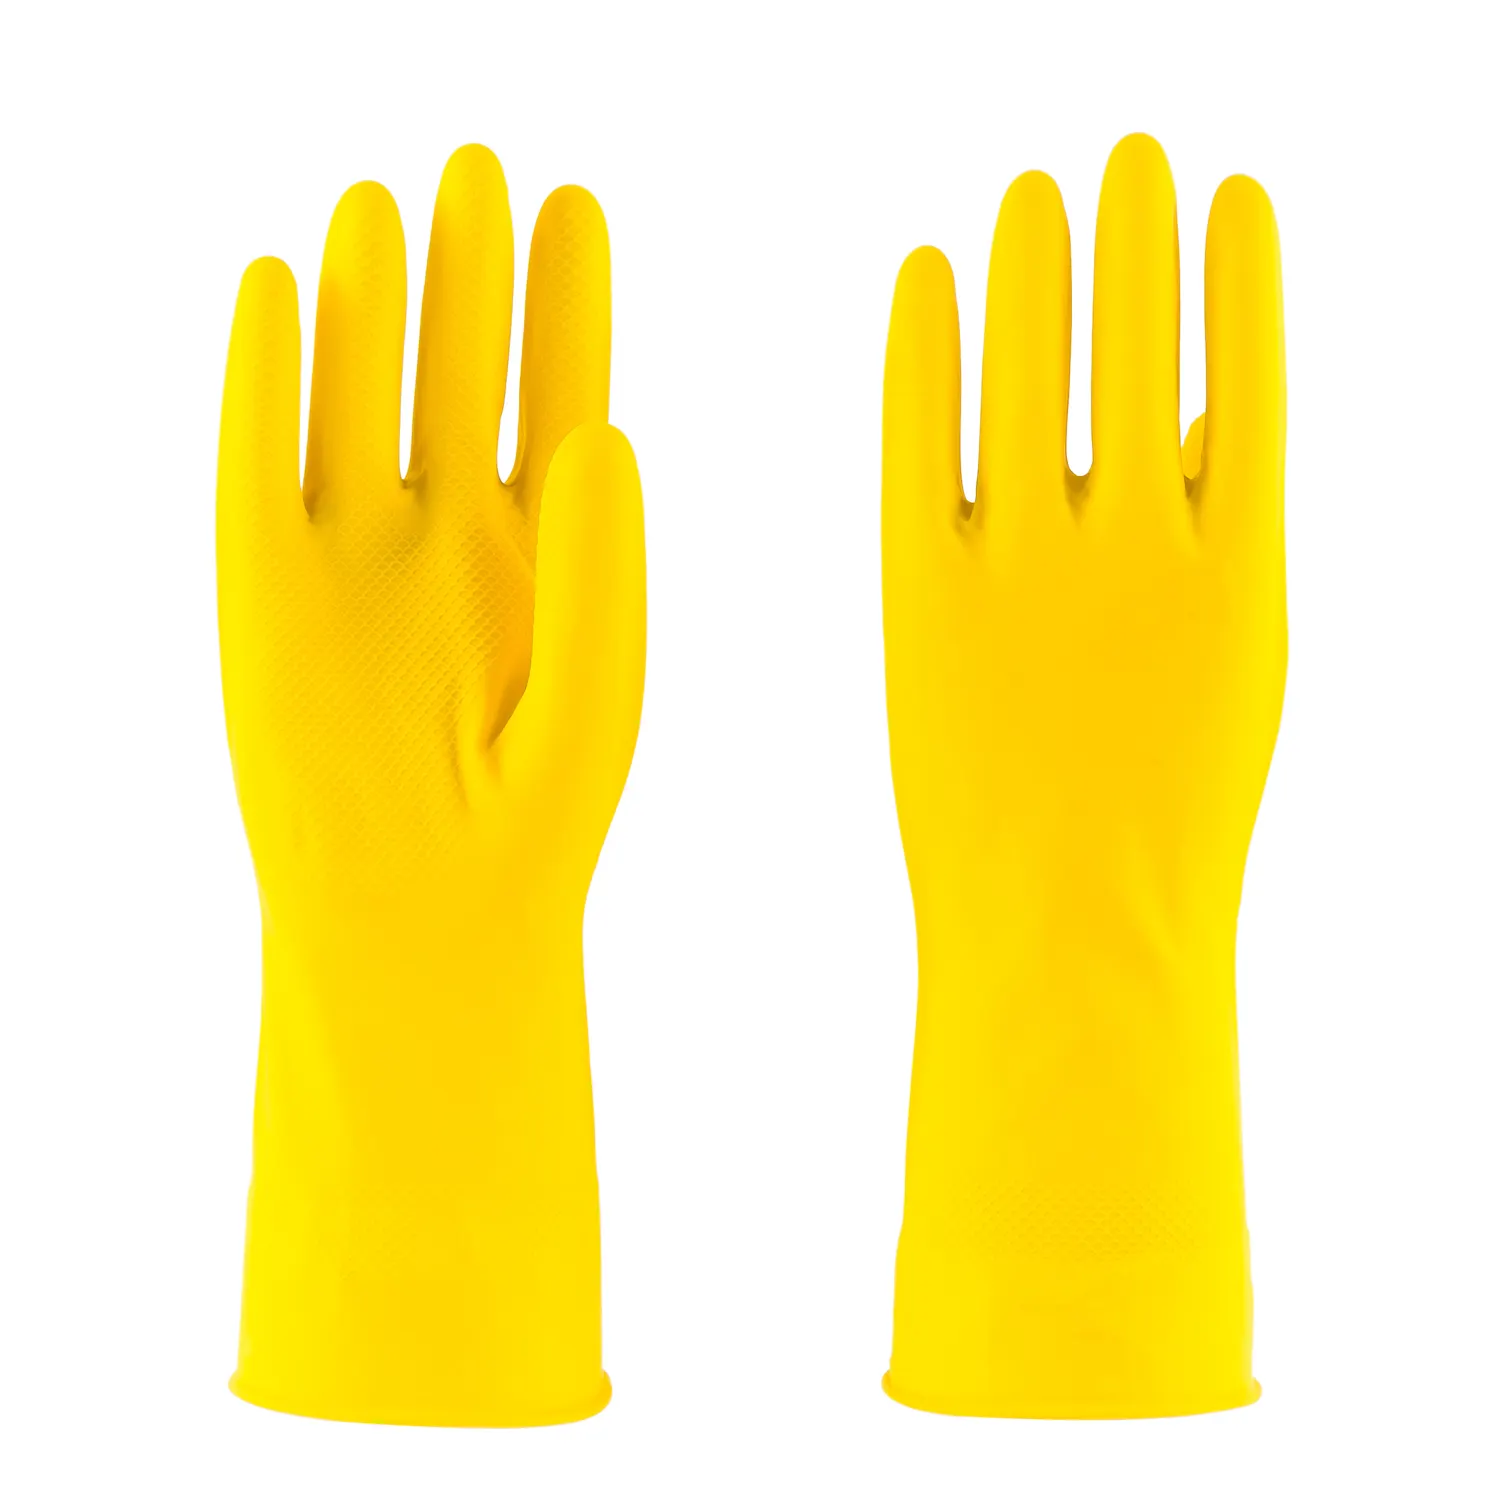 40g best selling yellow household latex gloves